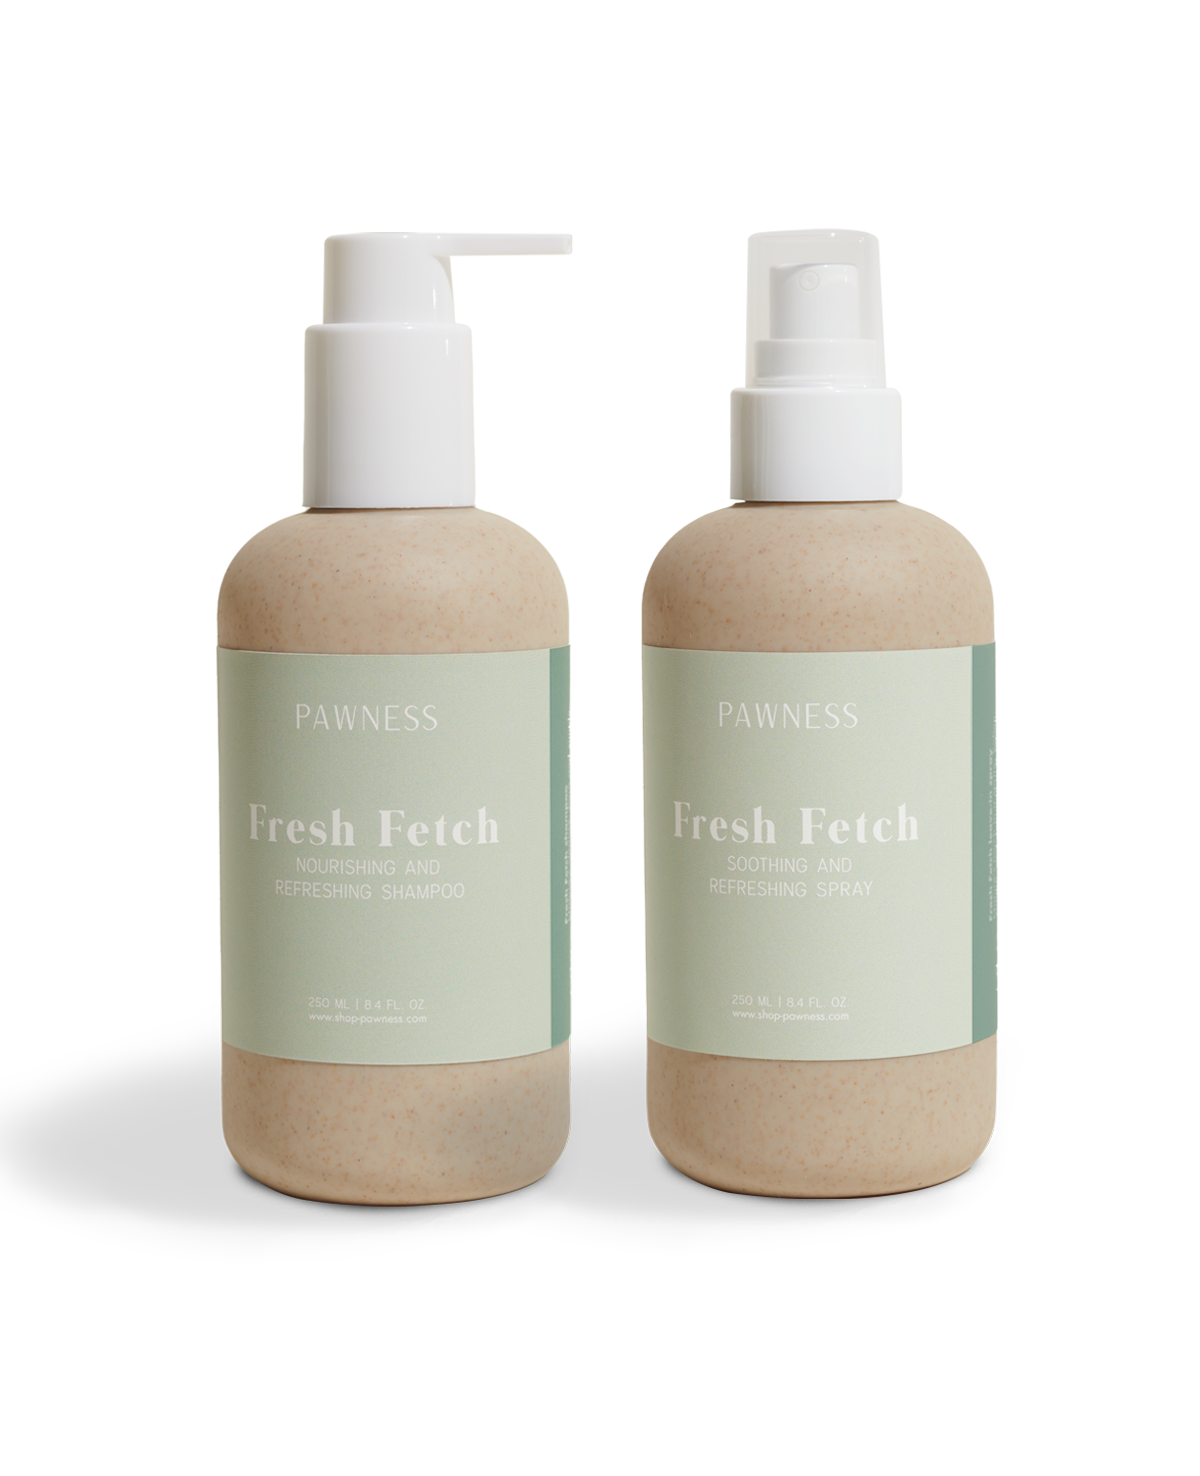 Two bottles of fresh Fetch hand wash, perfect for keeping your hands clean and fresh all day long.